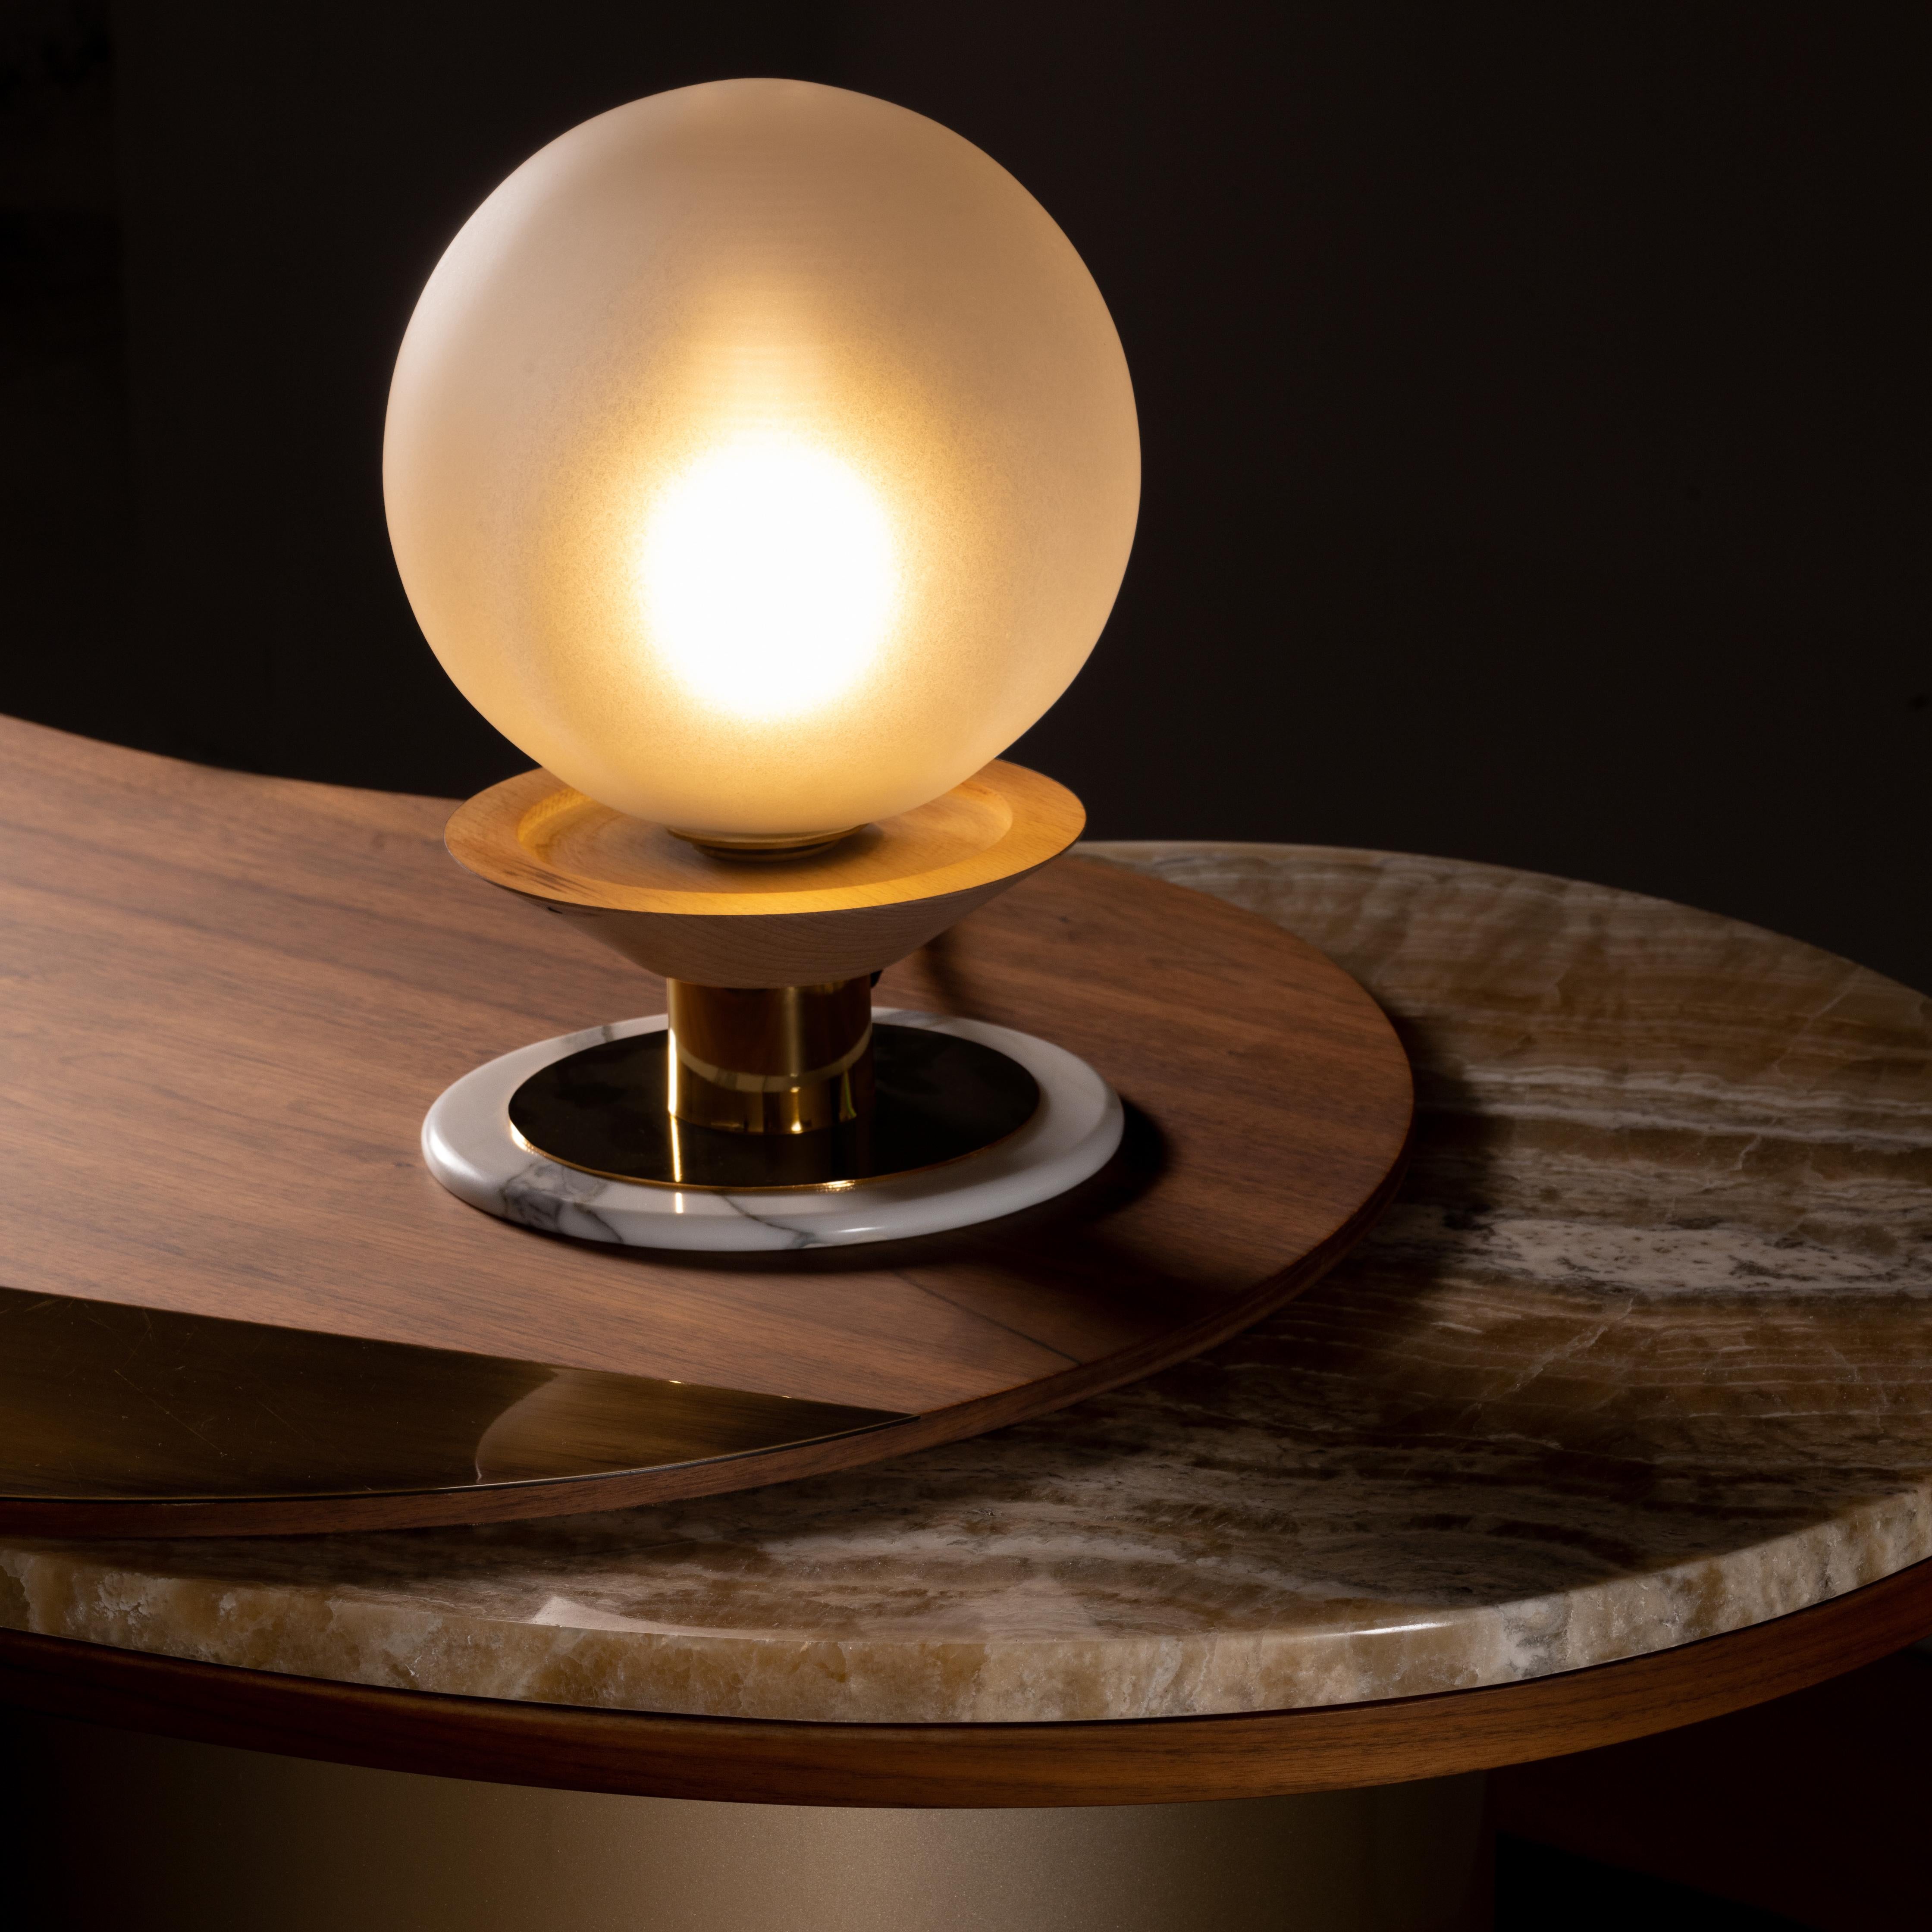 Mill table lamp, Contemporary Collection, handcrafted in Portugal - Europe by Greenapple.

Mill is a modern lighting concept and an attractive addition to a modern home. A table lamp that brings creative visions to life. The solid beech and